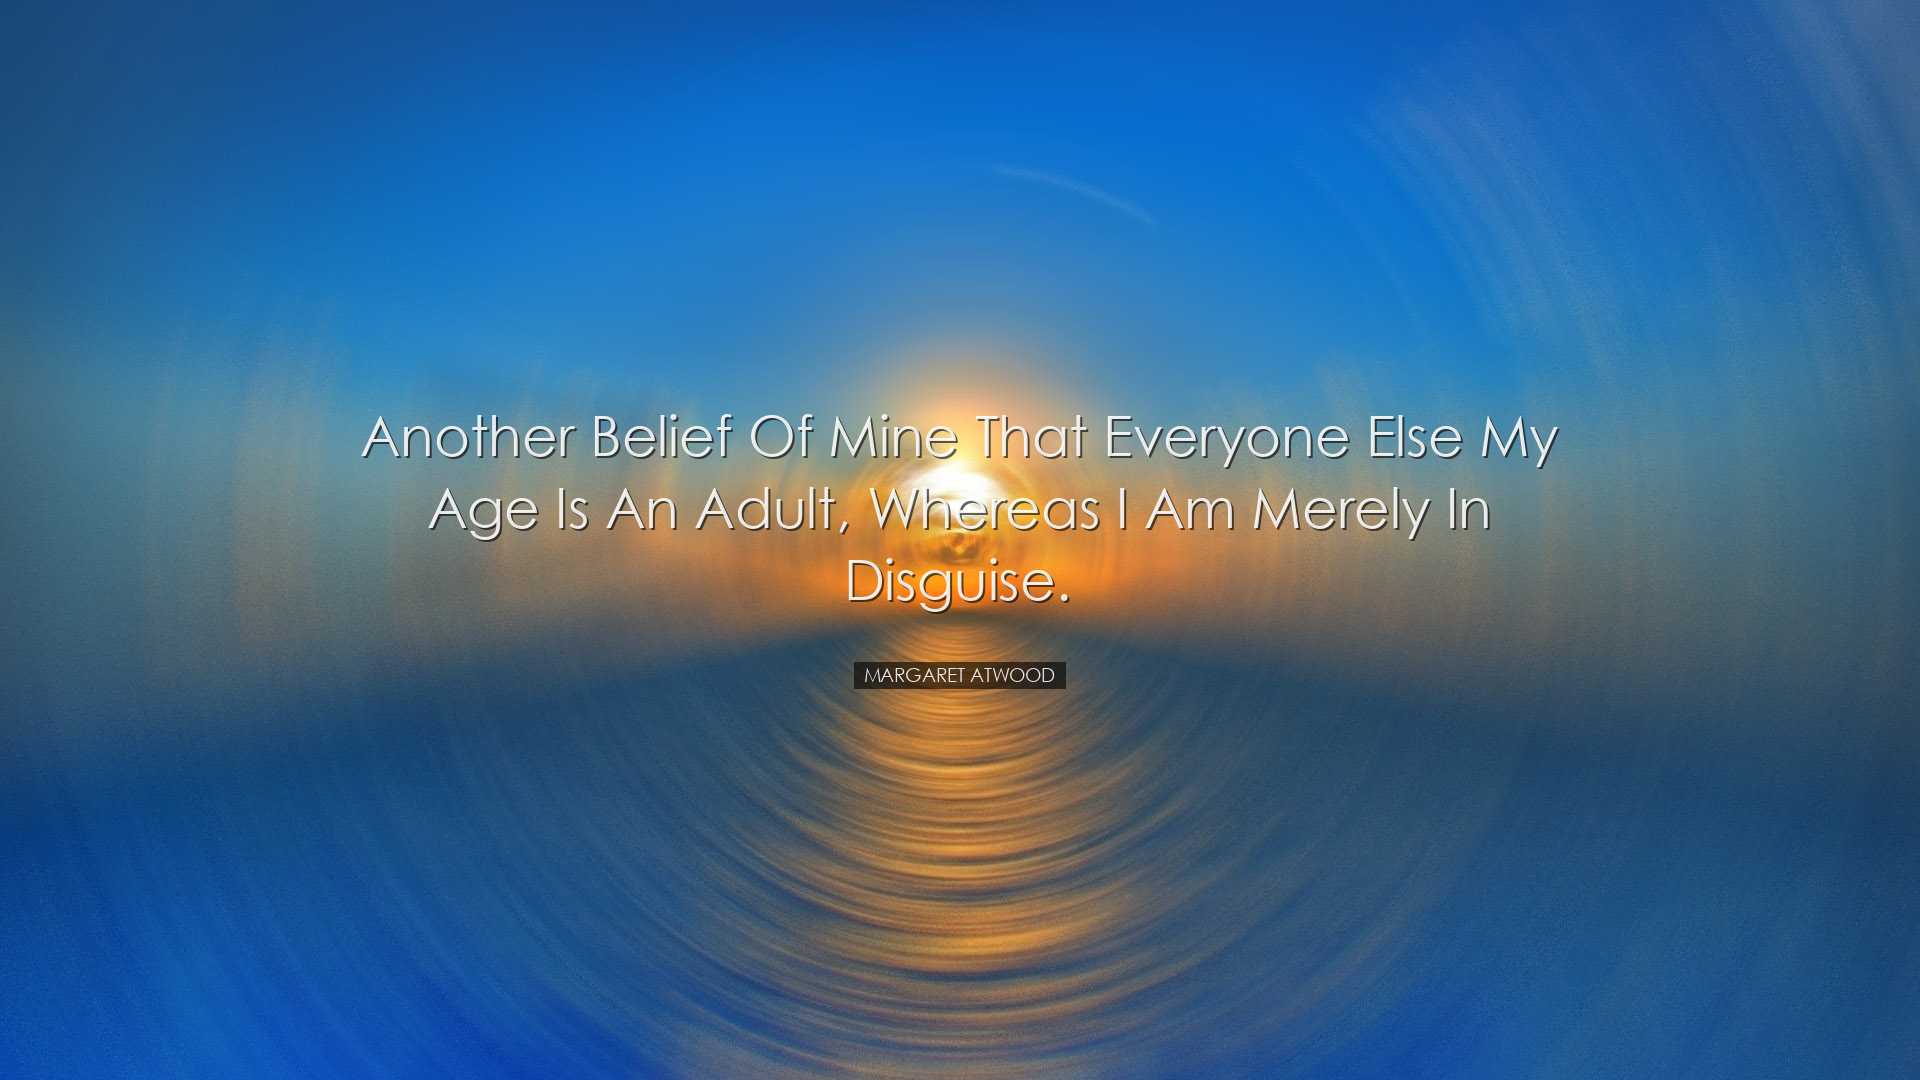 Another belief of mine that everyone else my age is an adult, wher